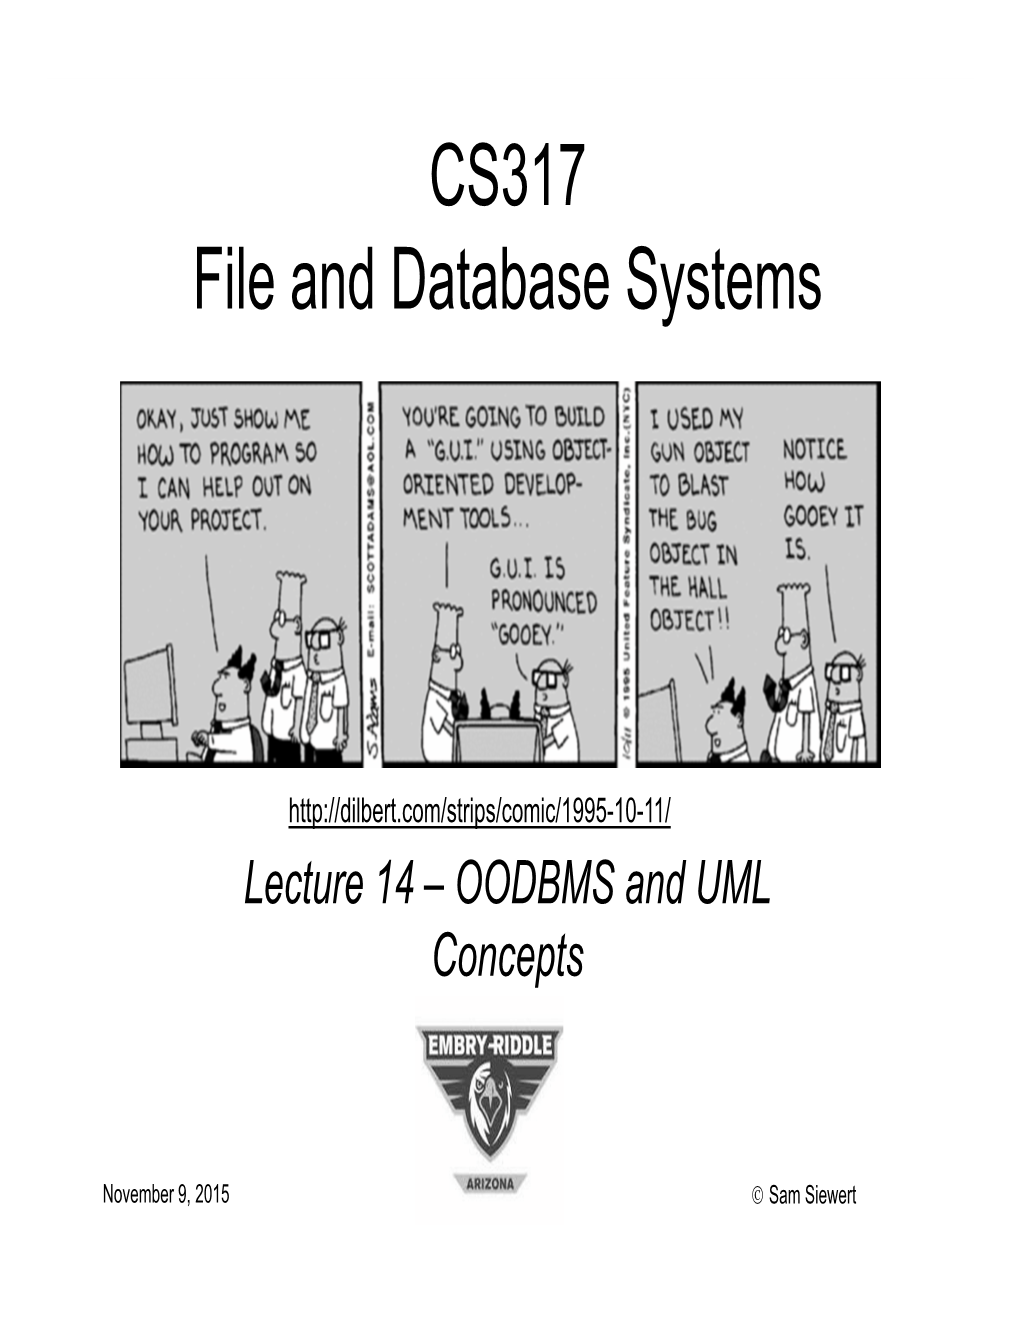 CS317 File and Database Systems